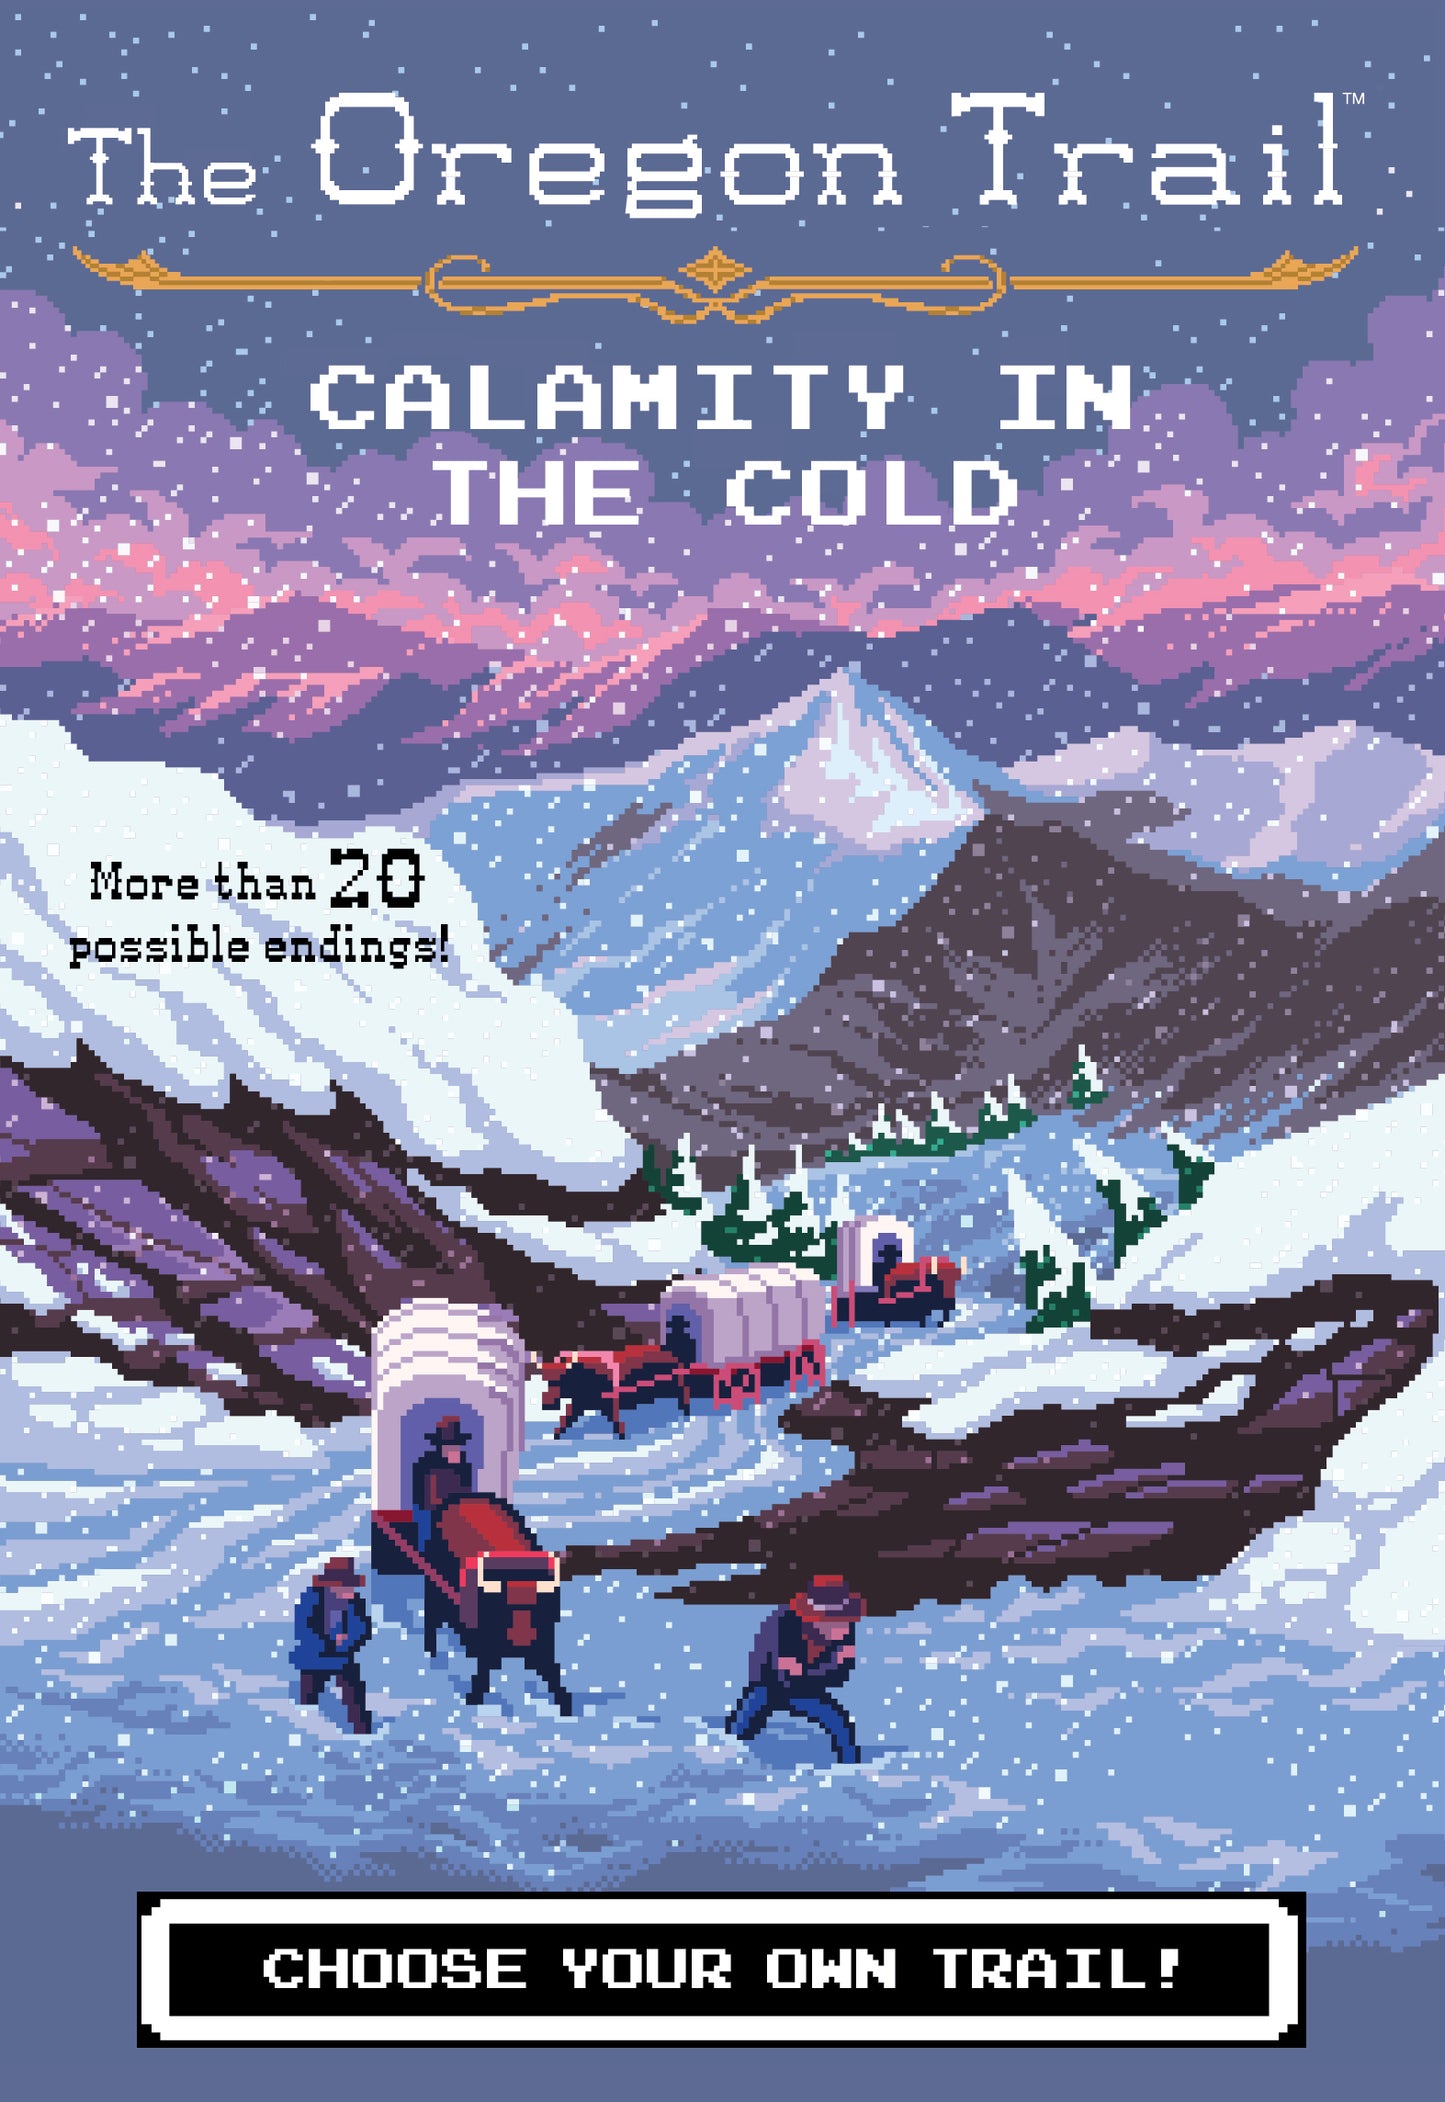 Book (Softcover) - The Oregon Trail: Calamity In The Cold